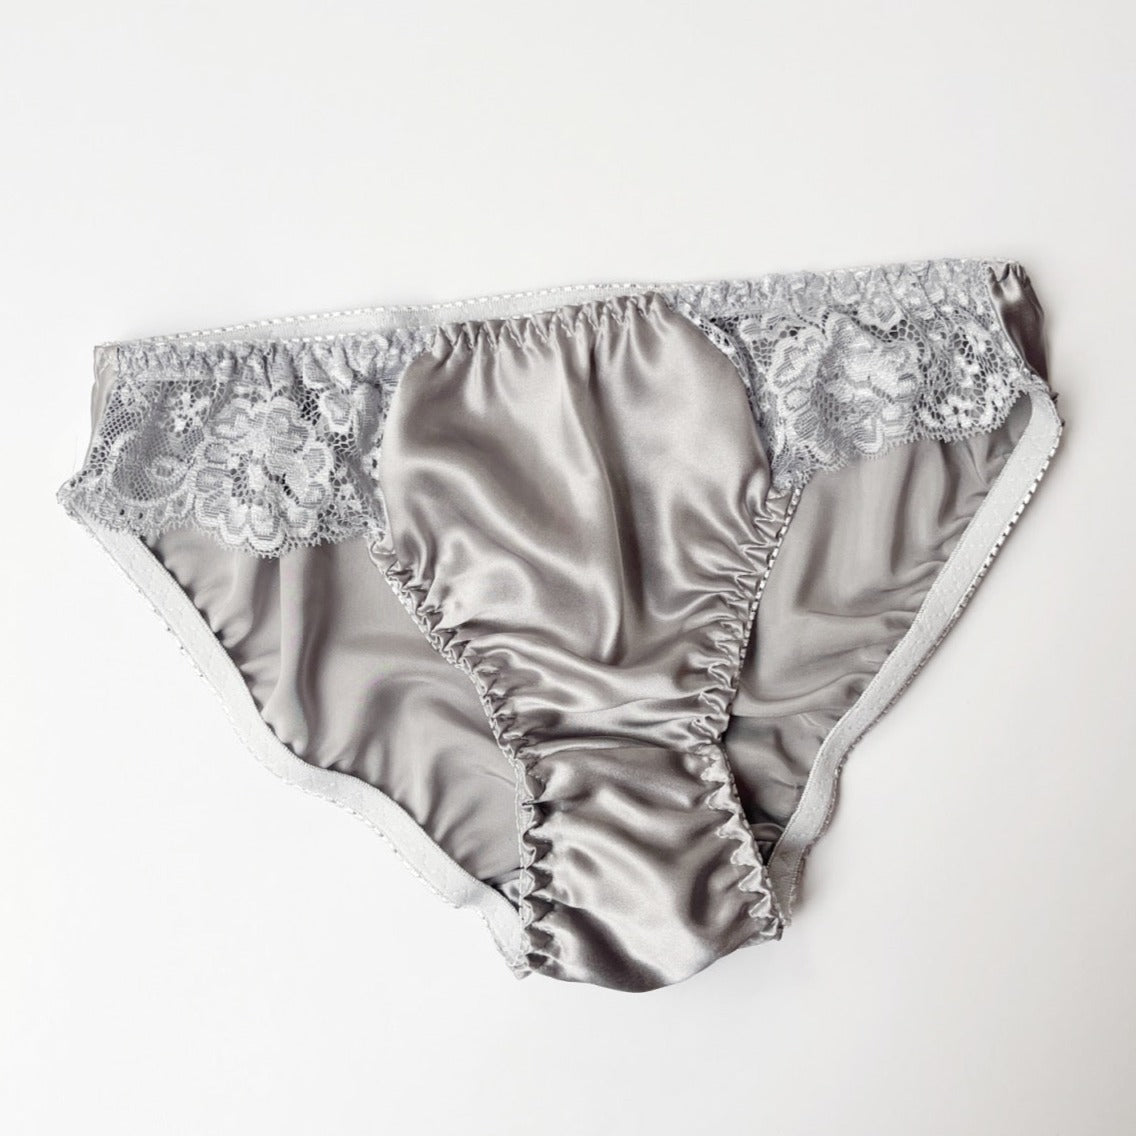 Grey pure silk underwear for women, silk panties, made in Canada silk lingerie and apparel